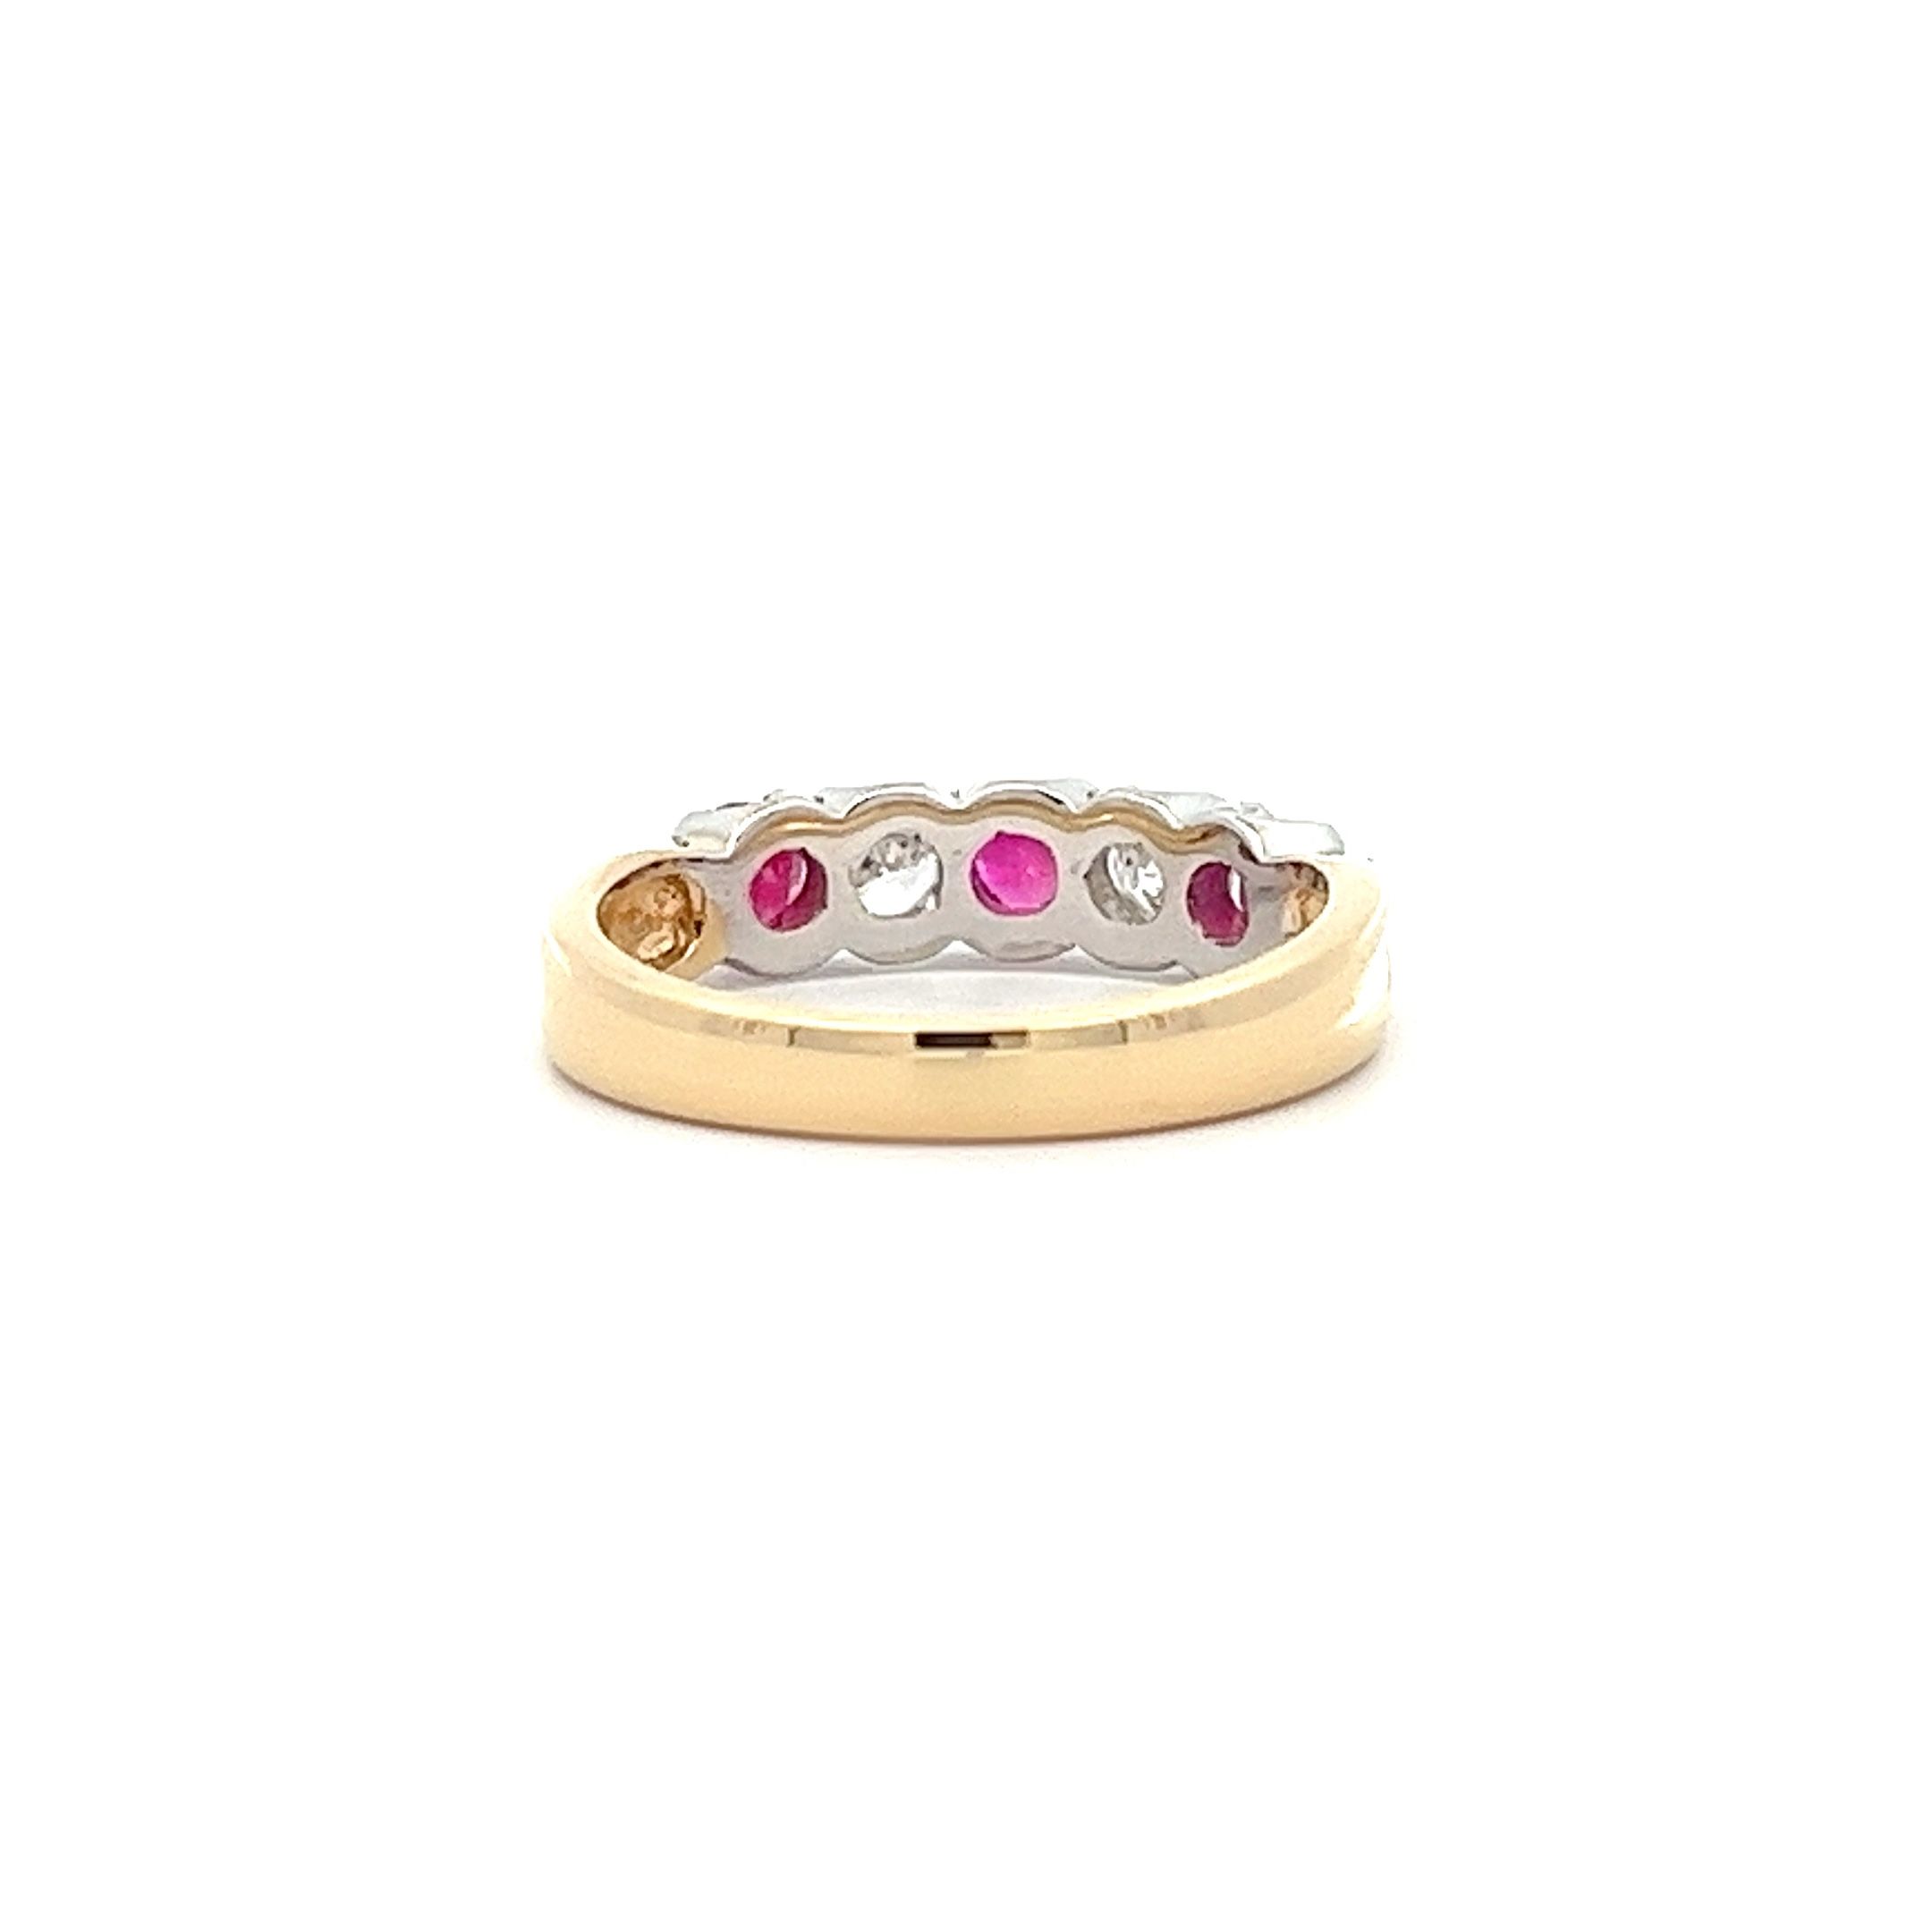 0.29ct Diamond and 0.55ct Ruby, 18ct Yellow and White Gold 5 Stone Ring